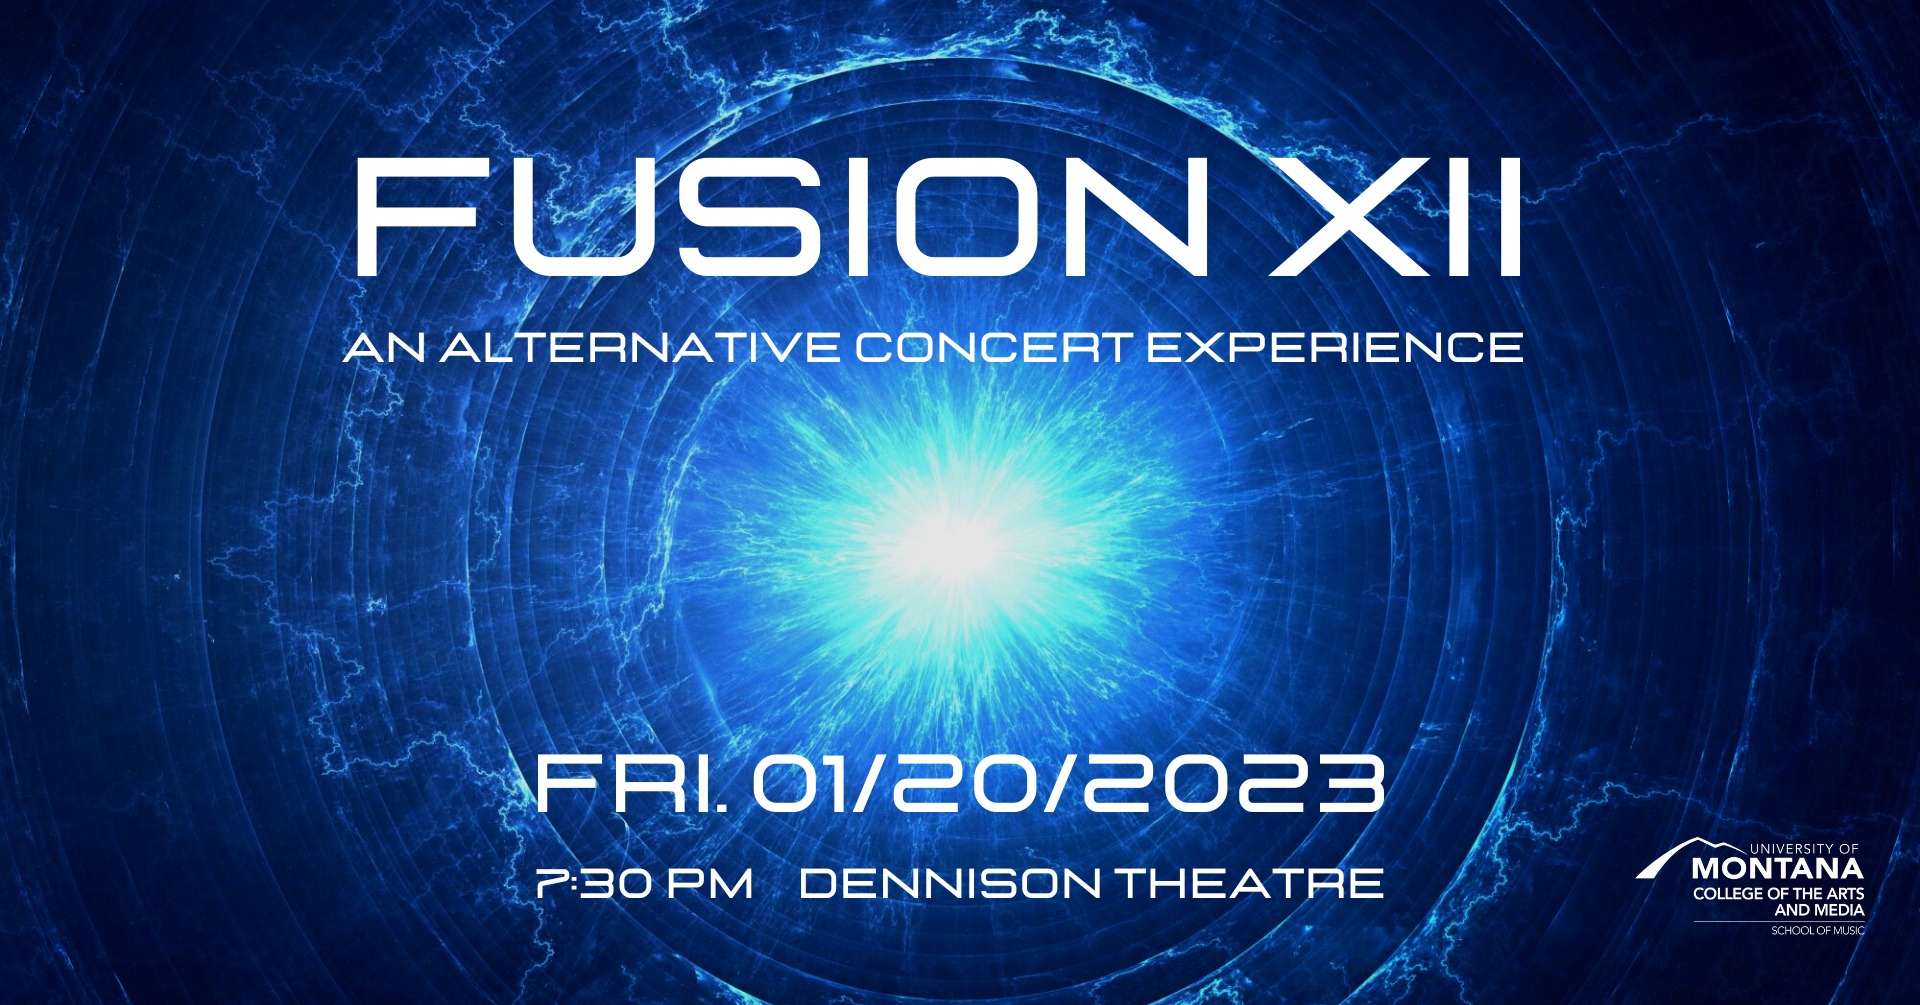 Fusion XII - an Alternative Concert Experience live at UM Dennison Theater on Friday, January 20, 2023